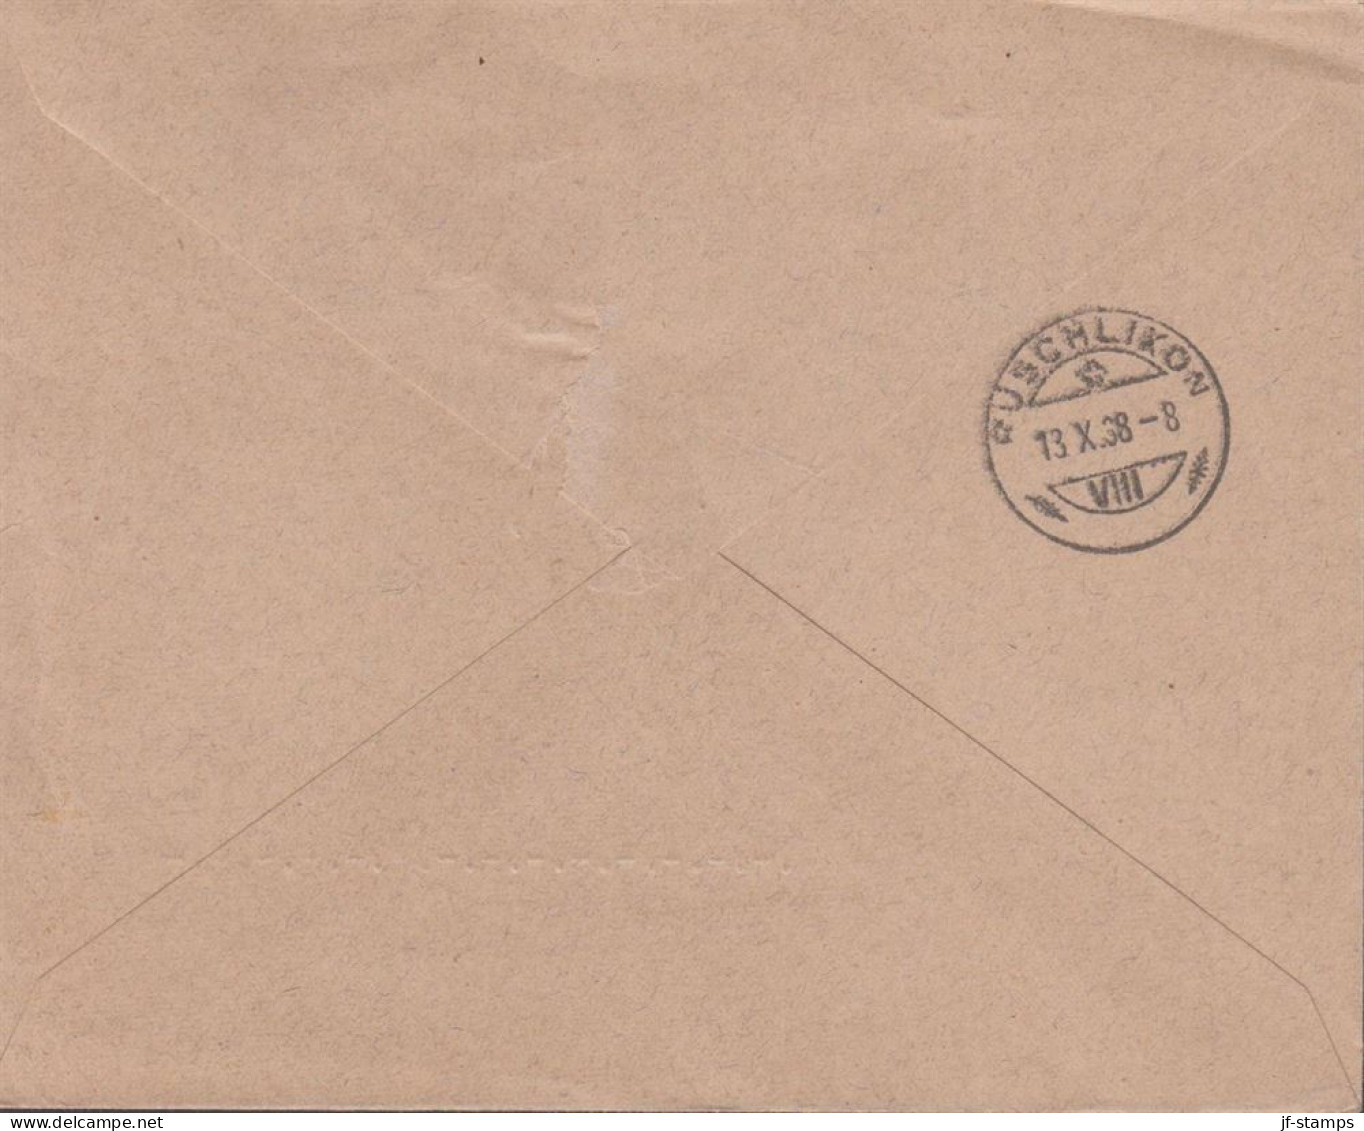 1938. SVERIGE. _Fine LUFTPOST REGISTERED Cover With 10 + 50 öre LUFTPOST To Schweiz Cance... (Michel 213-214) - JF444797 - Covers & Documents